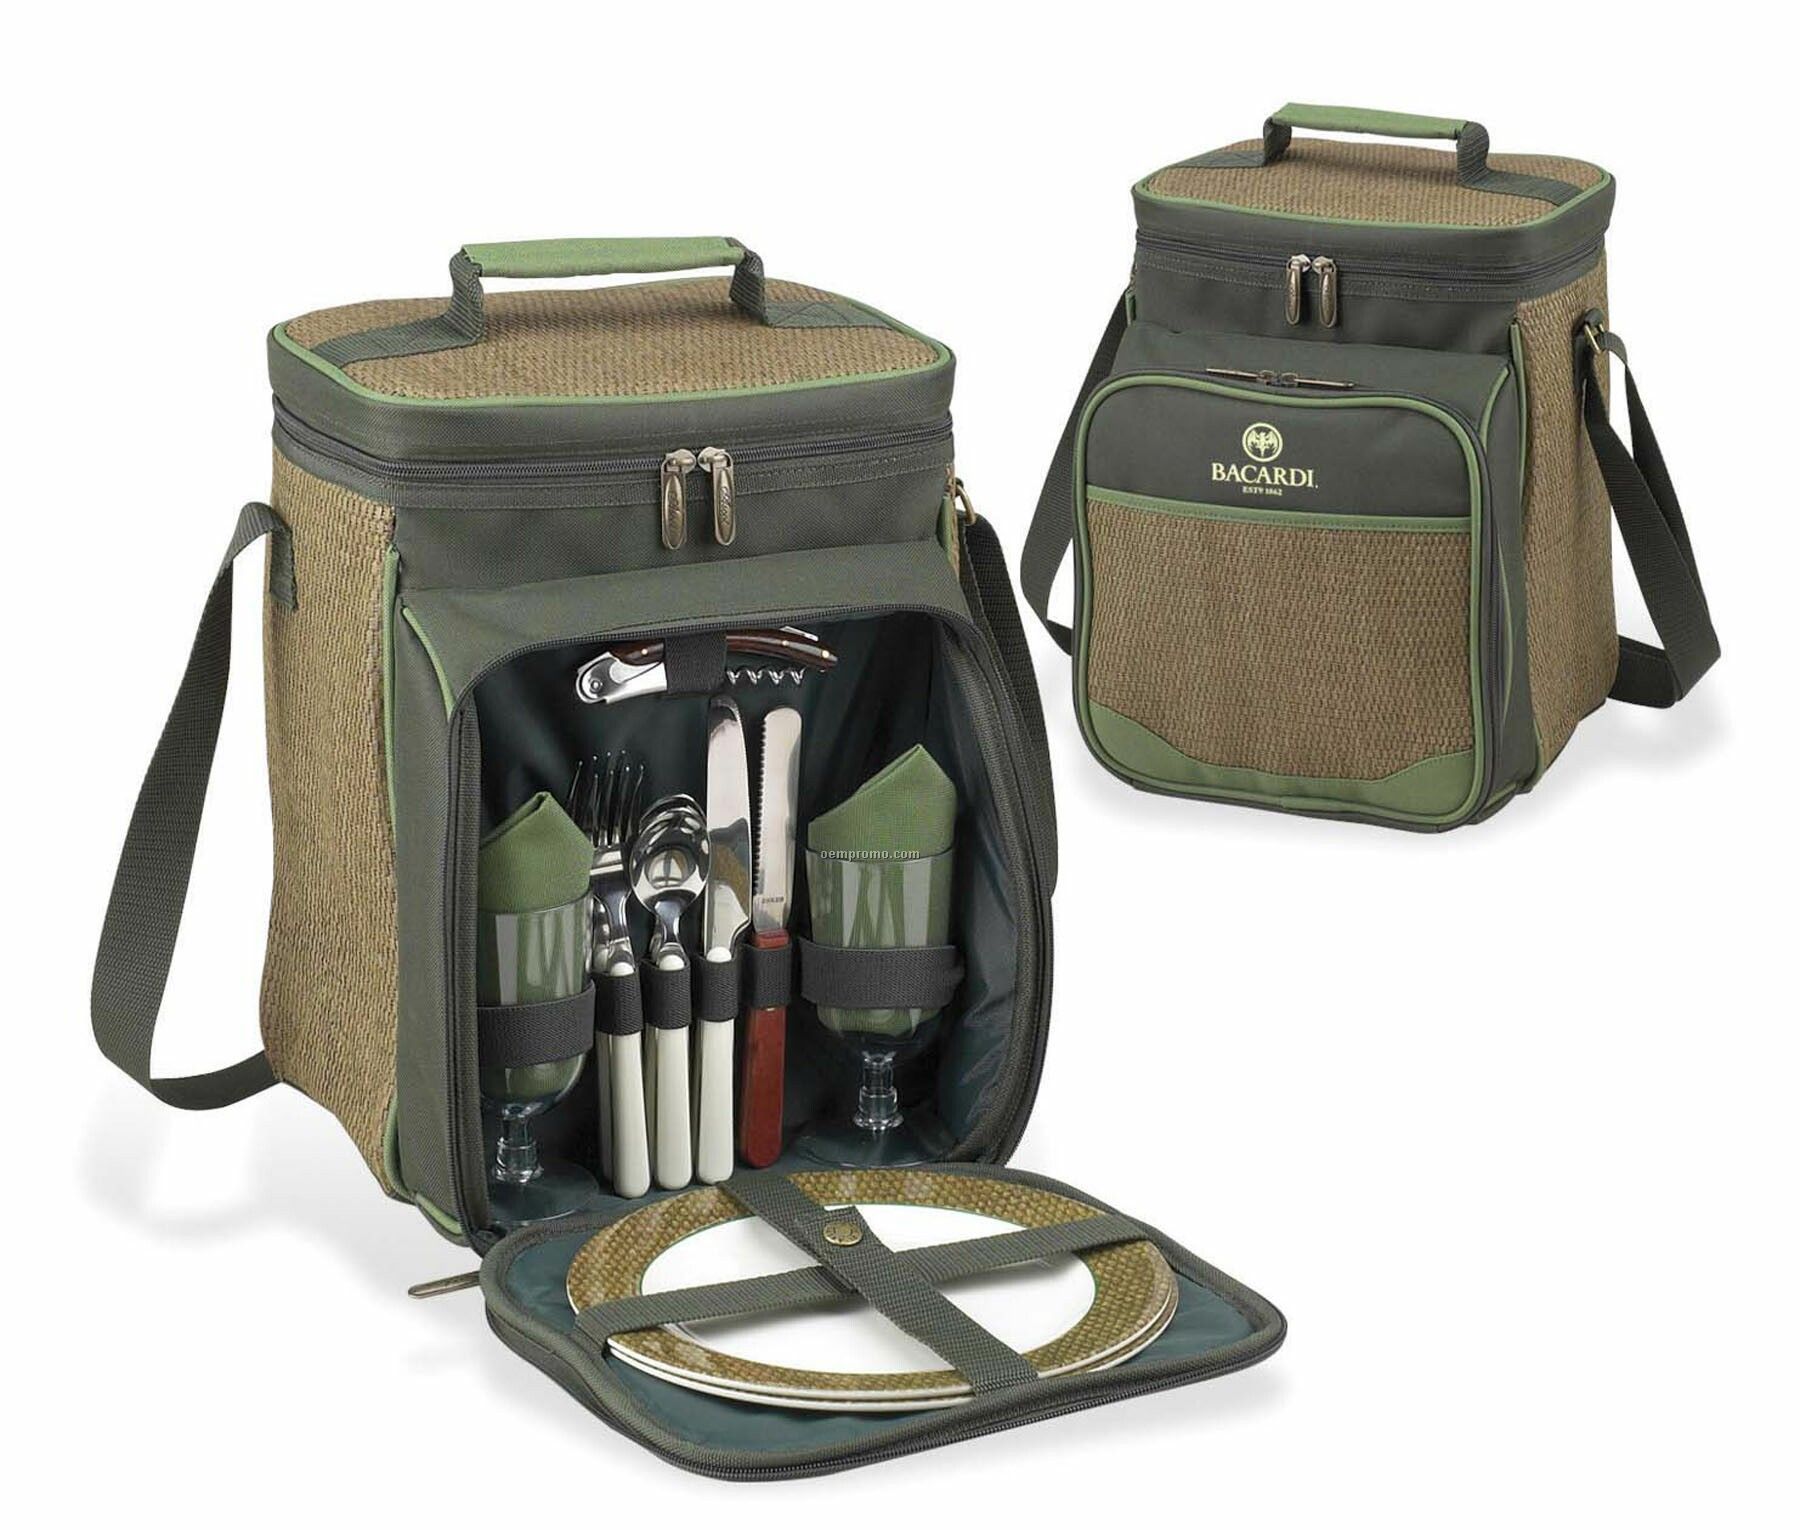 Picnic Cooler For Two - Eco Collection